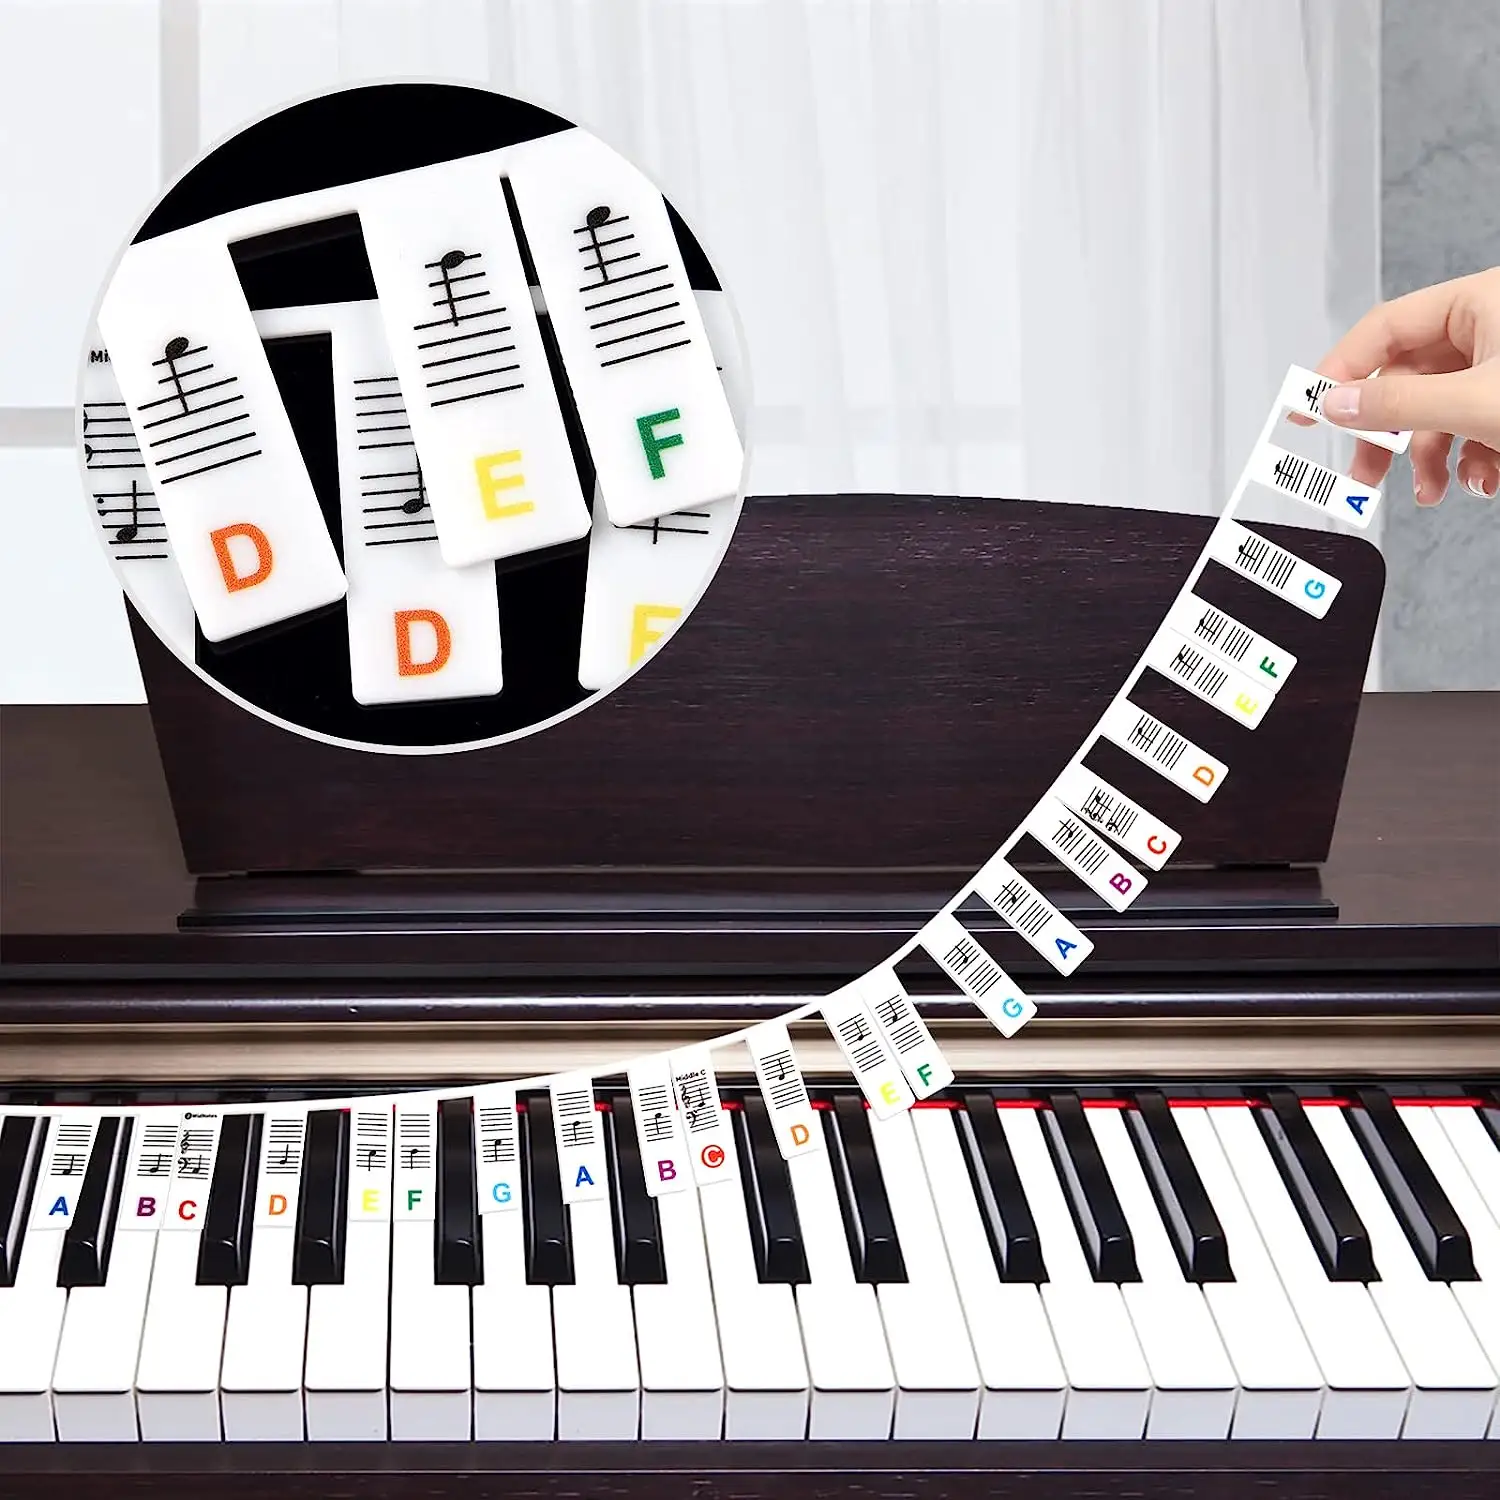 Removable Piano Keyboard Note Labels Guide For Beginner Learning 88 61 Keys Full Size Reusable No Need Sticker